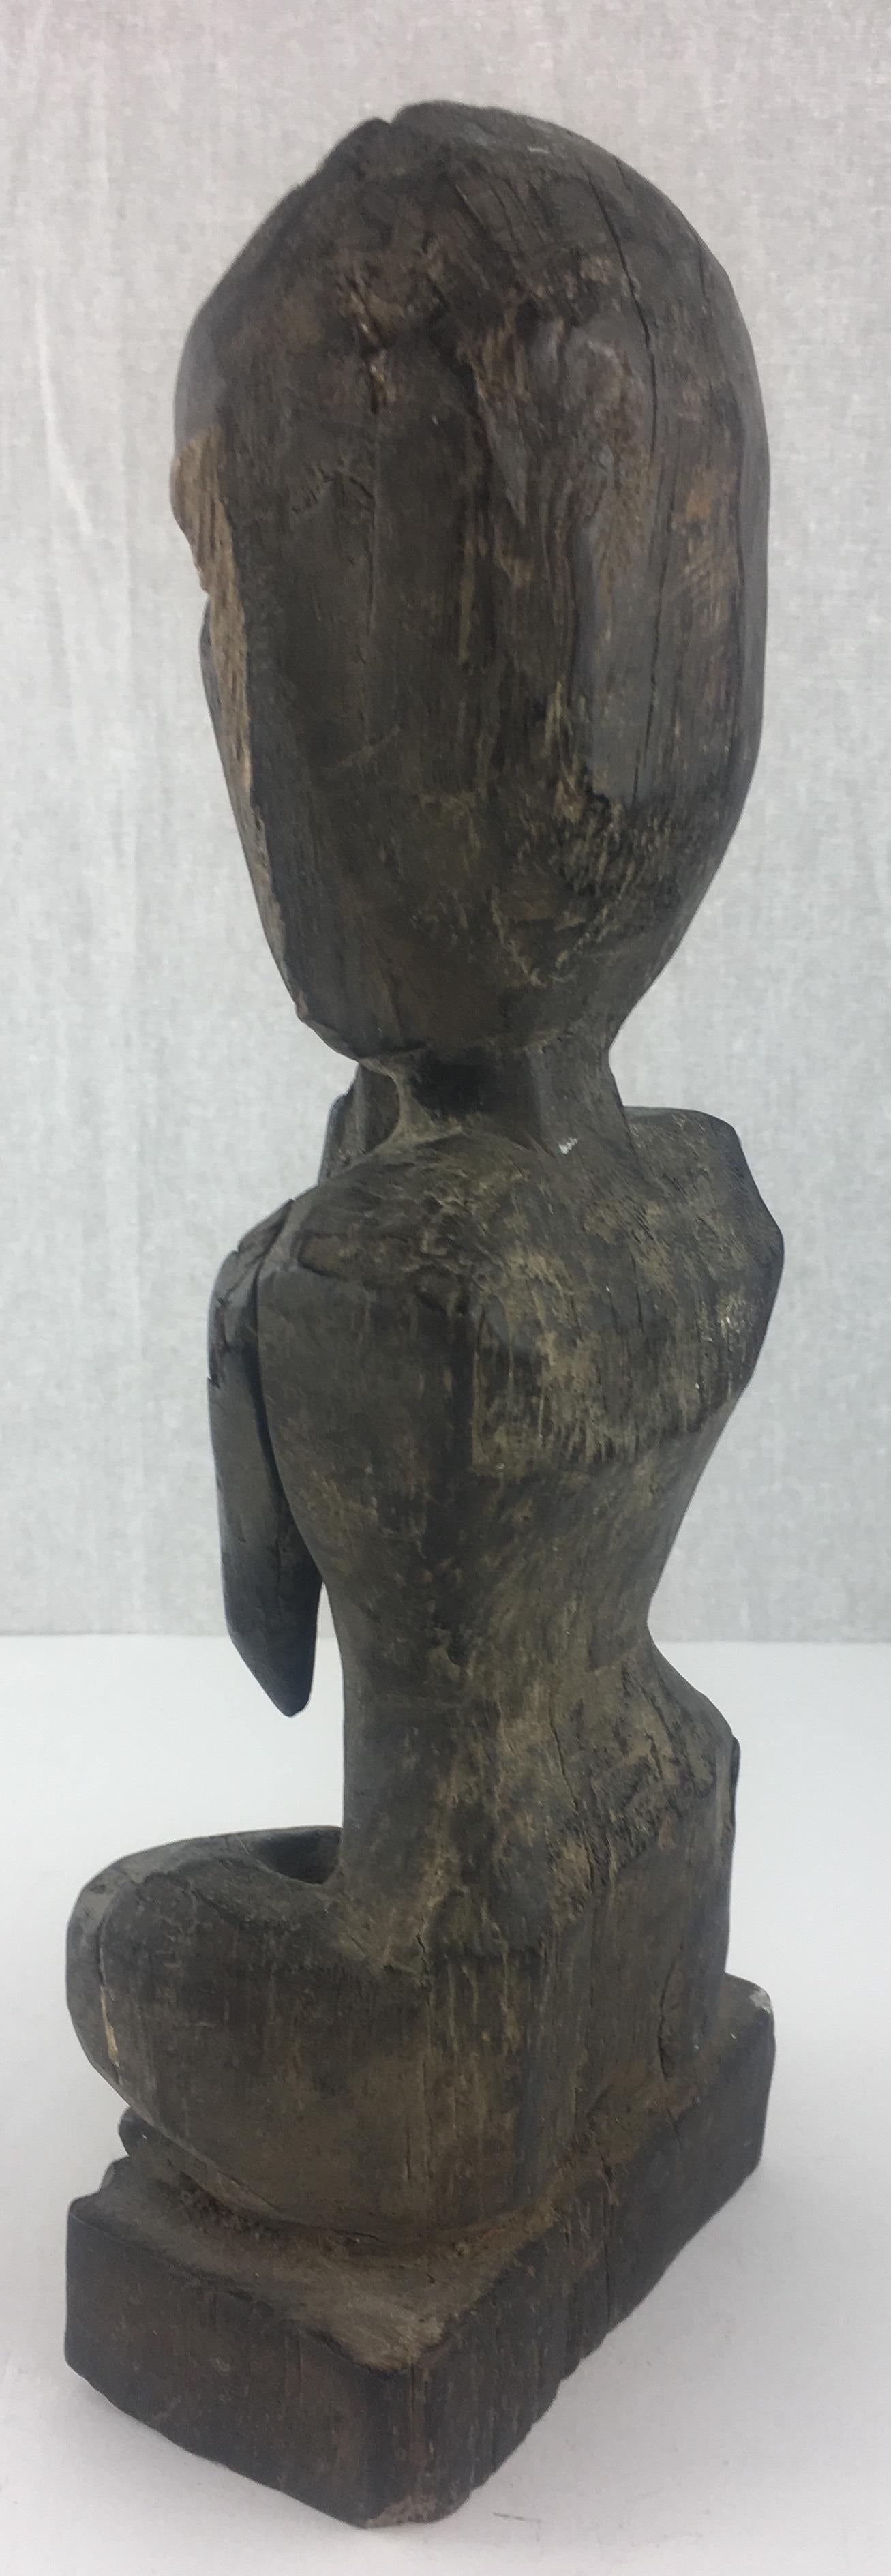 Beautiful vintage hand carved wooden statue of a woman in a yoga or meditation pose. 

This statue has a wonderful patina and would be perfect for a yoga studio, meditation room or anywhere.